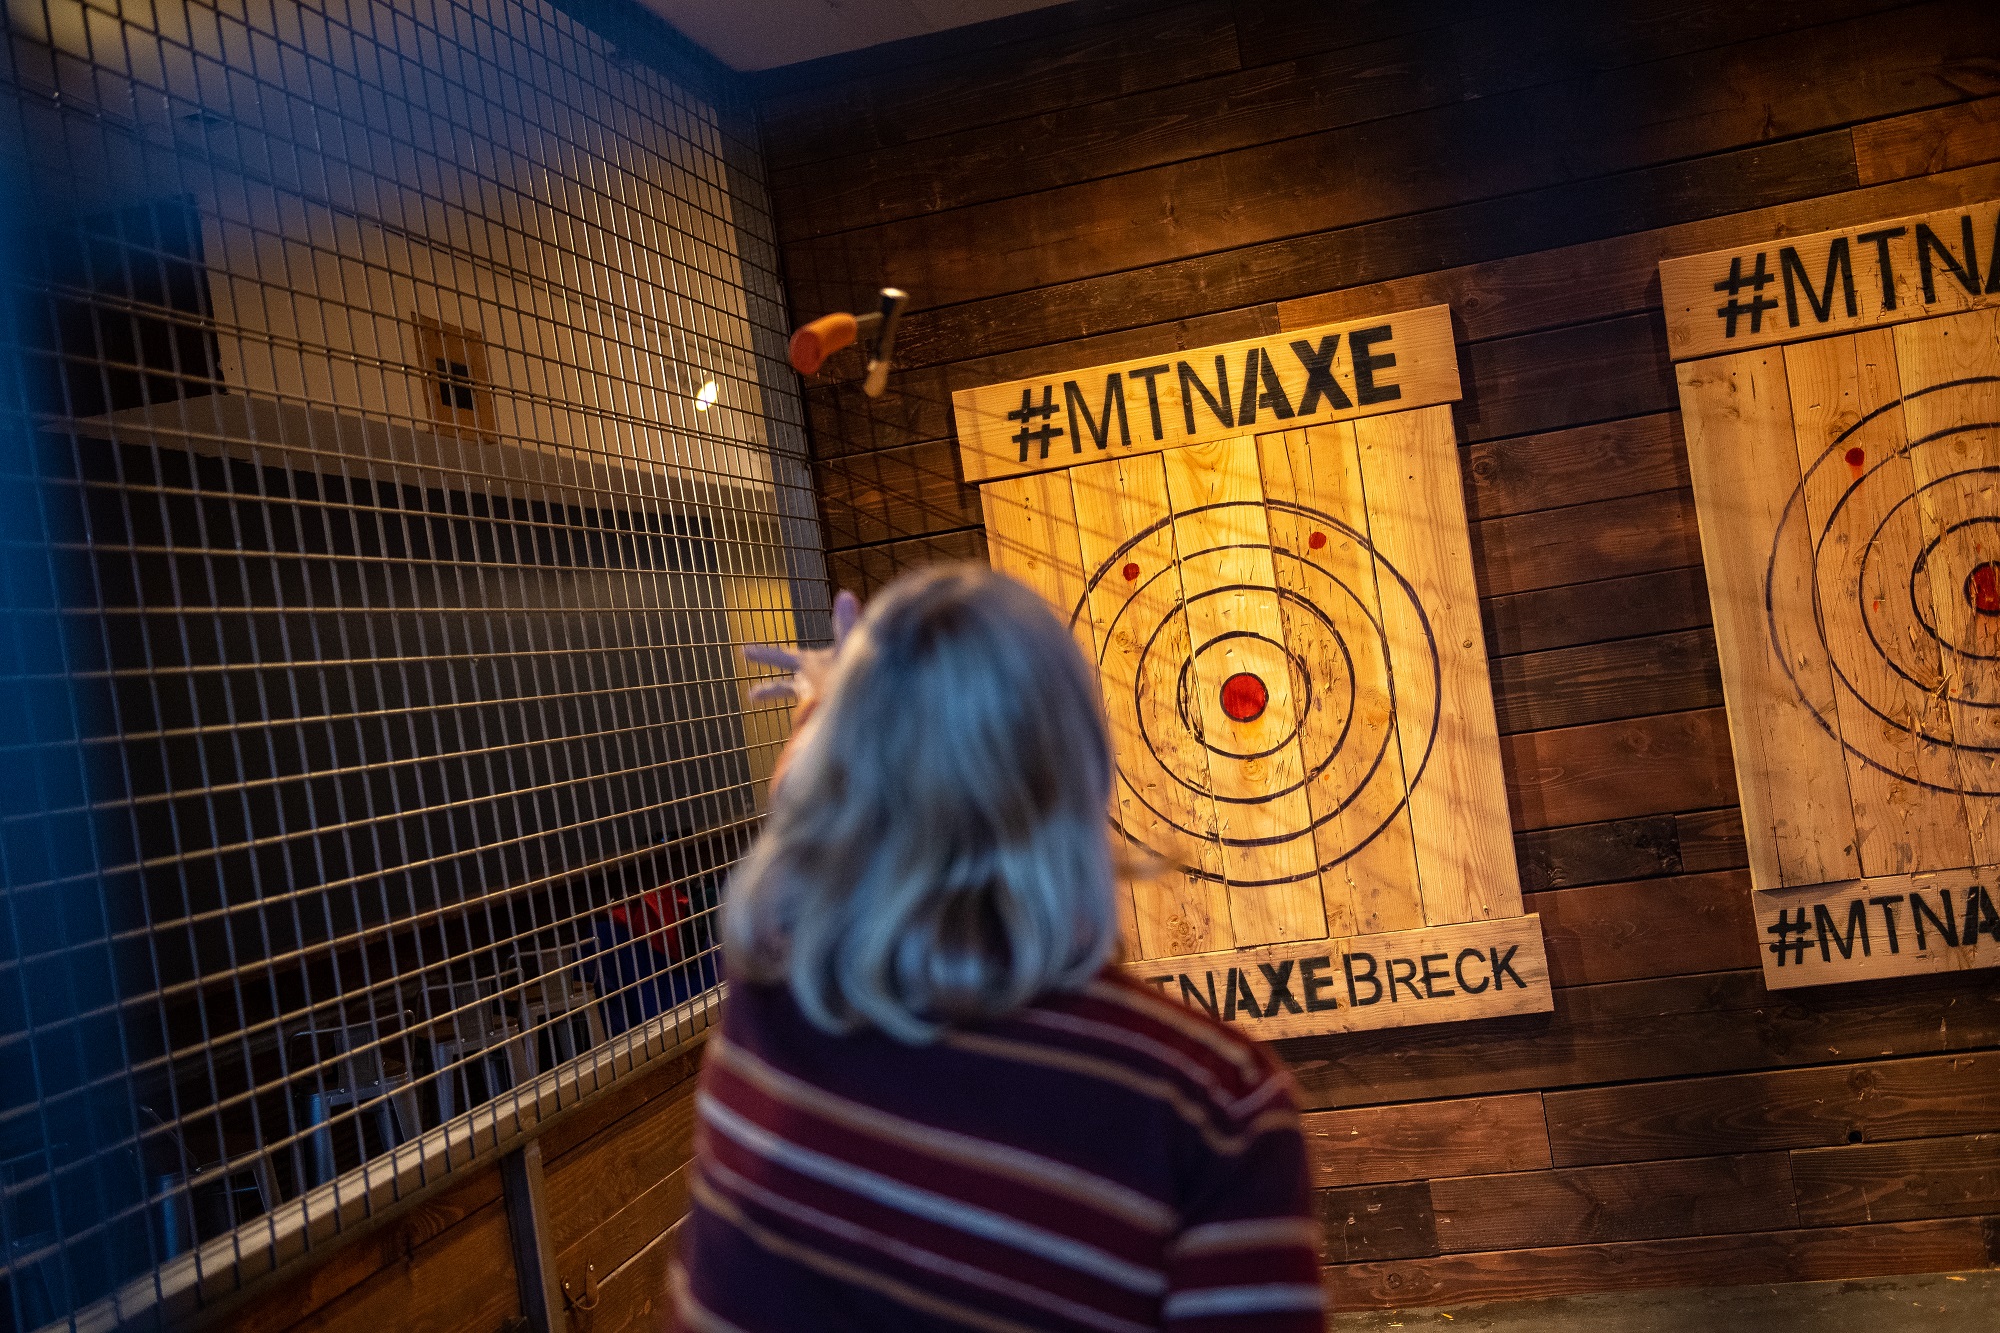 Axe throwing targets at MTN AXE Breck